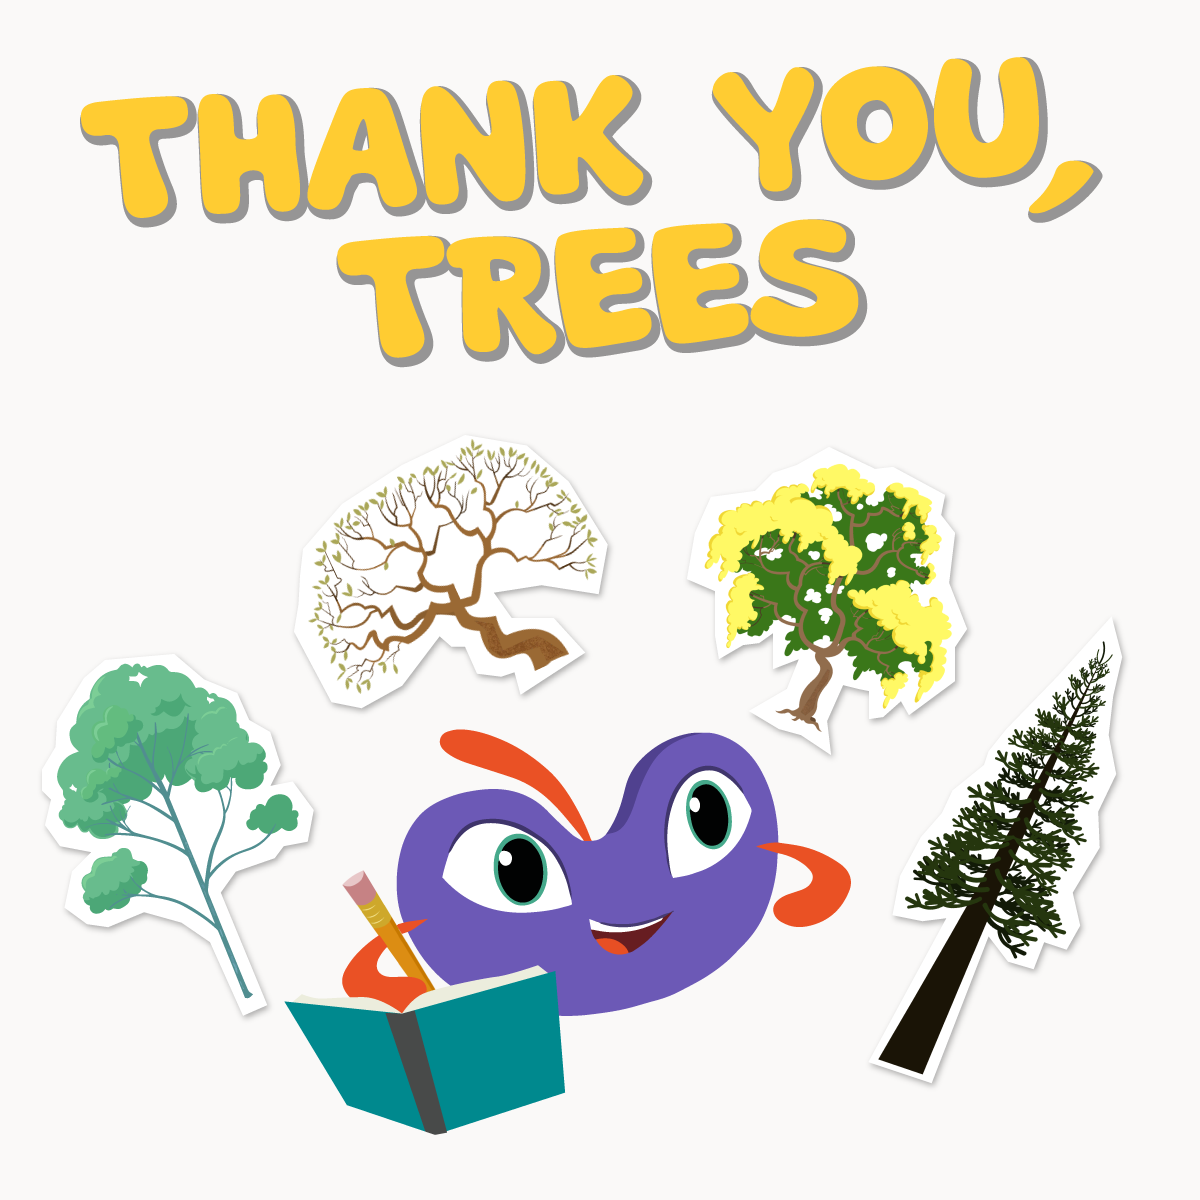 Thank you trees promotional graphic